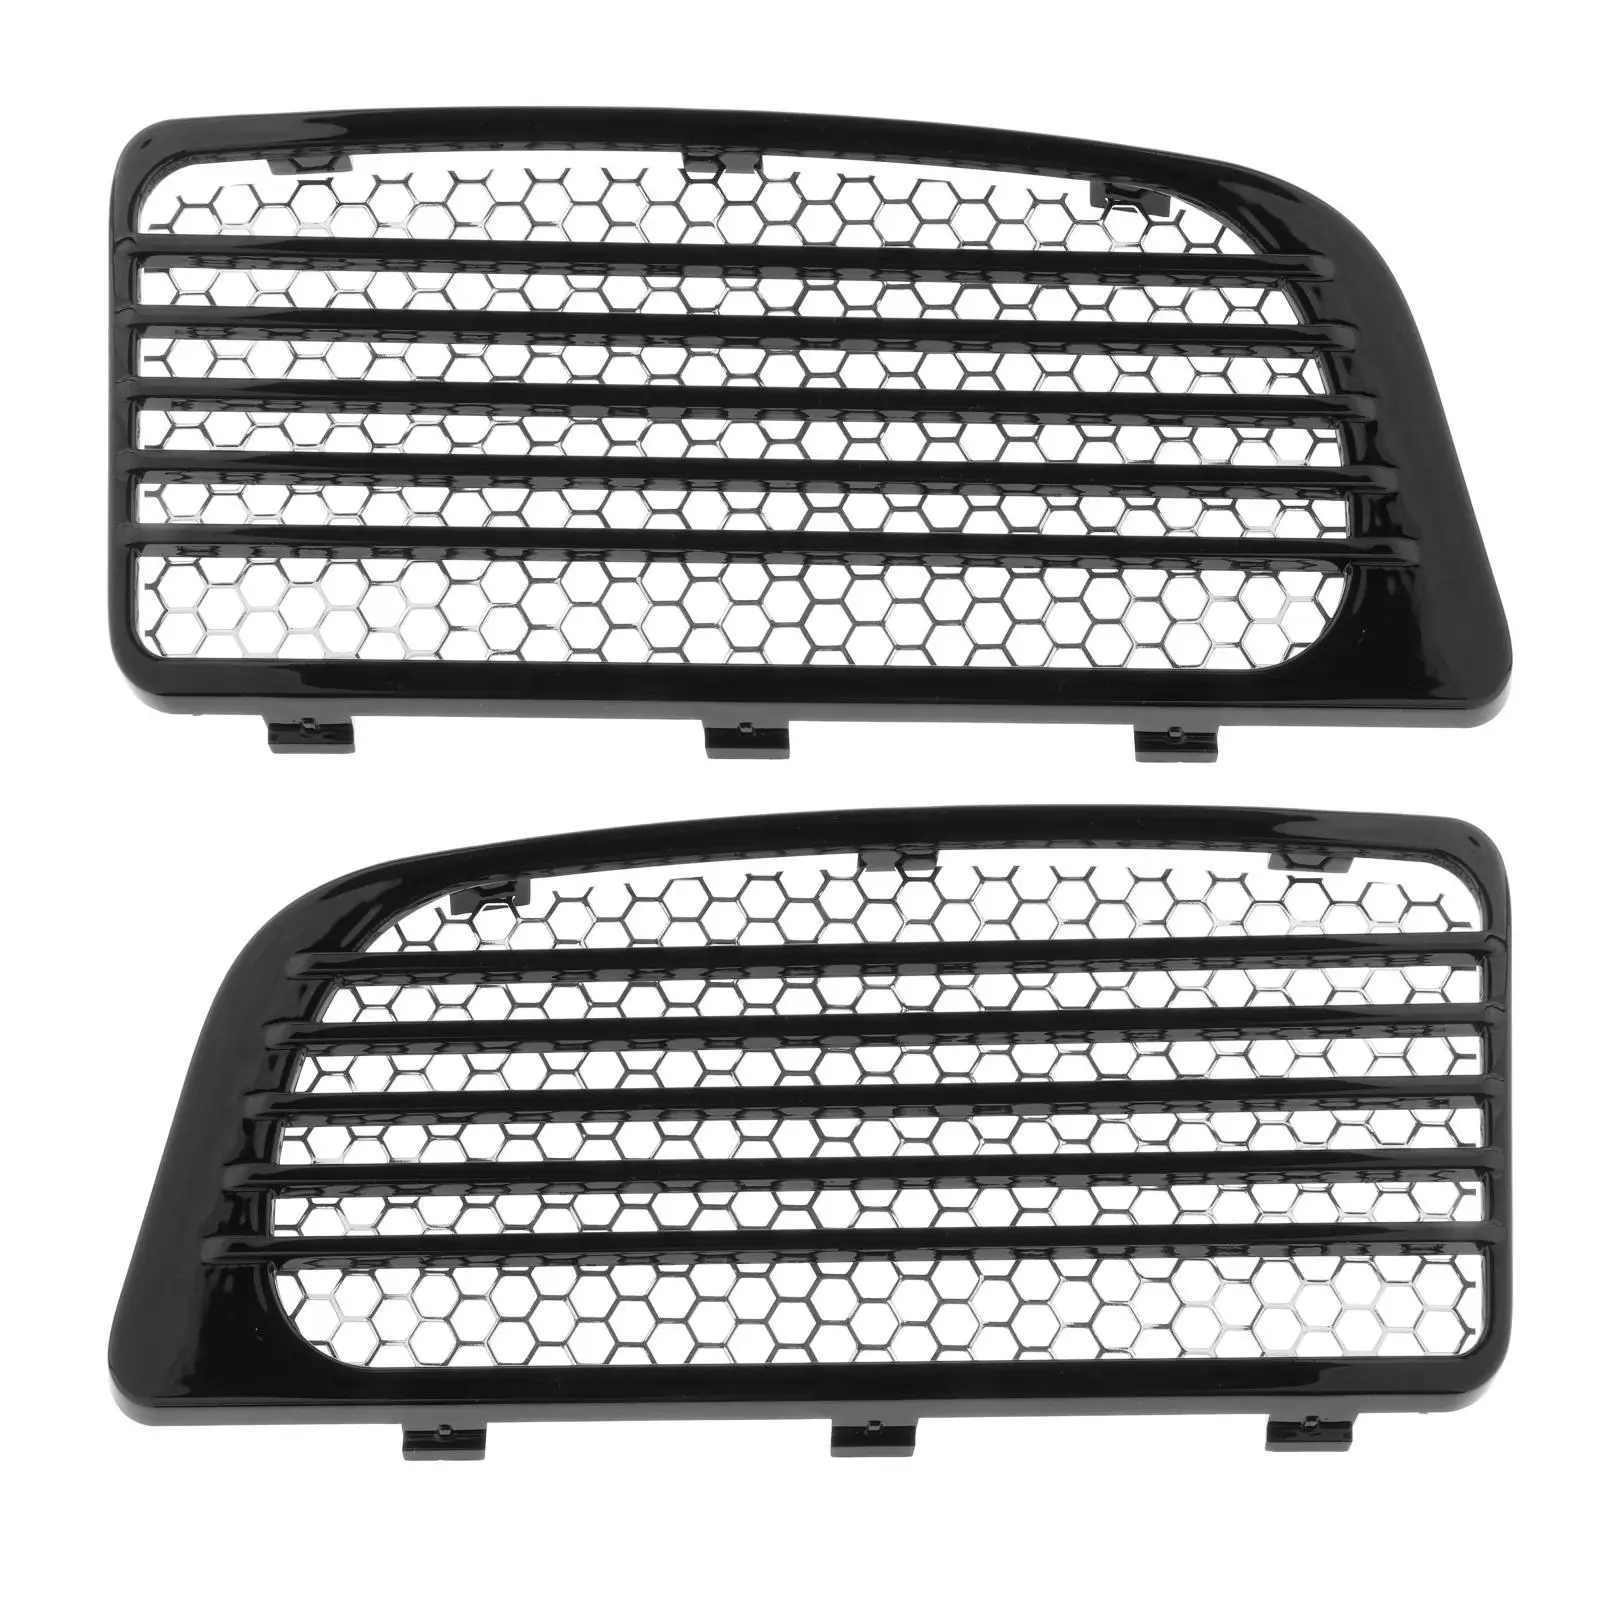 

2x Motorcycle Grills w/ Metal Mesh Fit for Touring Cooled 14+ Easy to Install